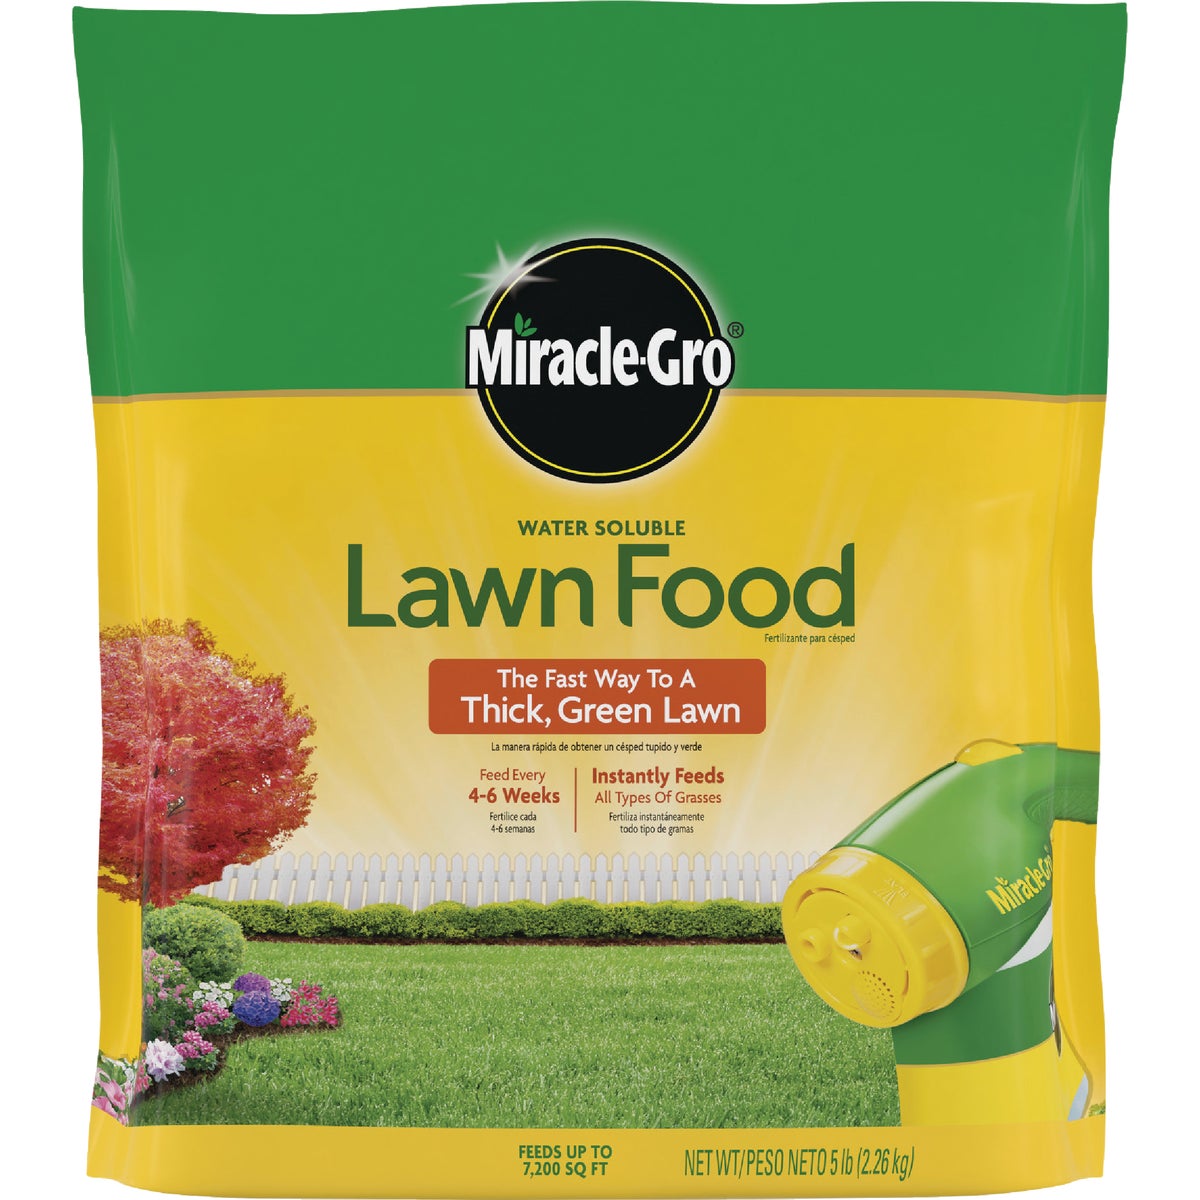 Miracle-Gro 5 Lb. 7200 Sq. Ft. Lawn Food